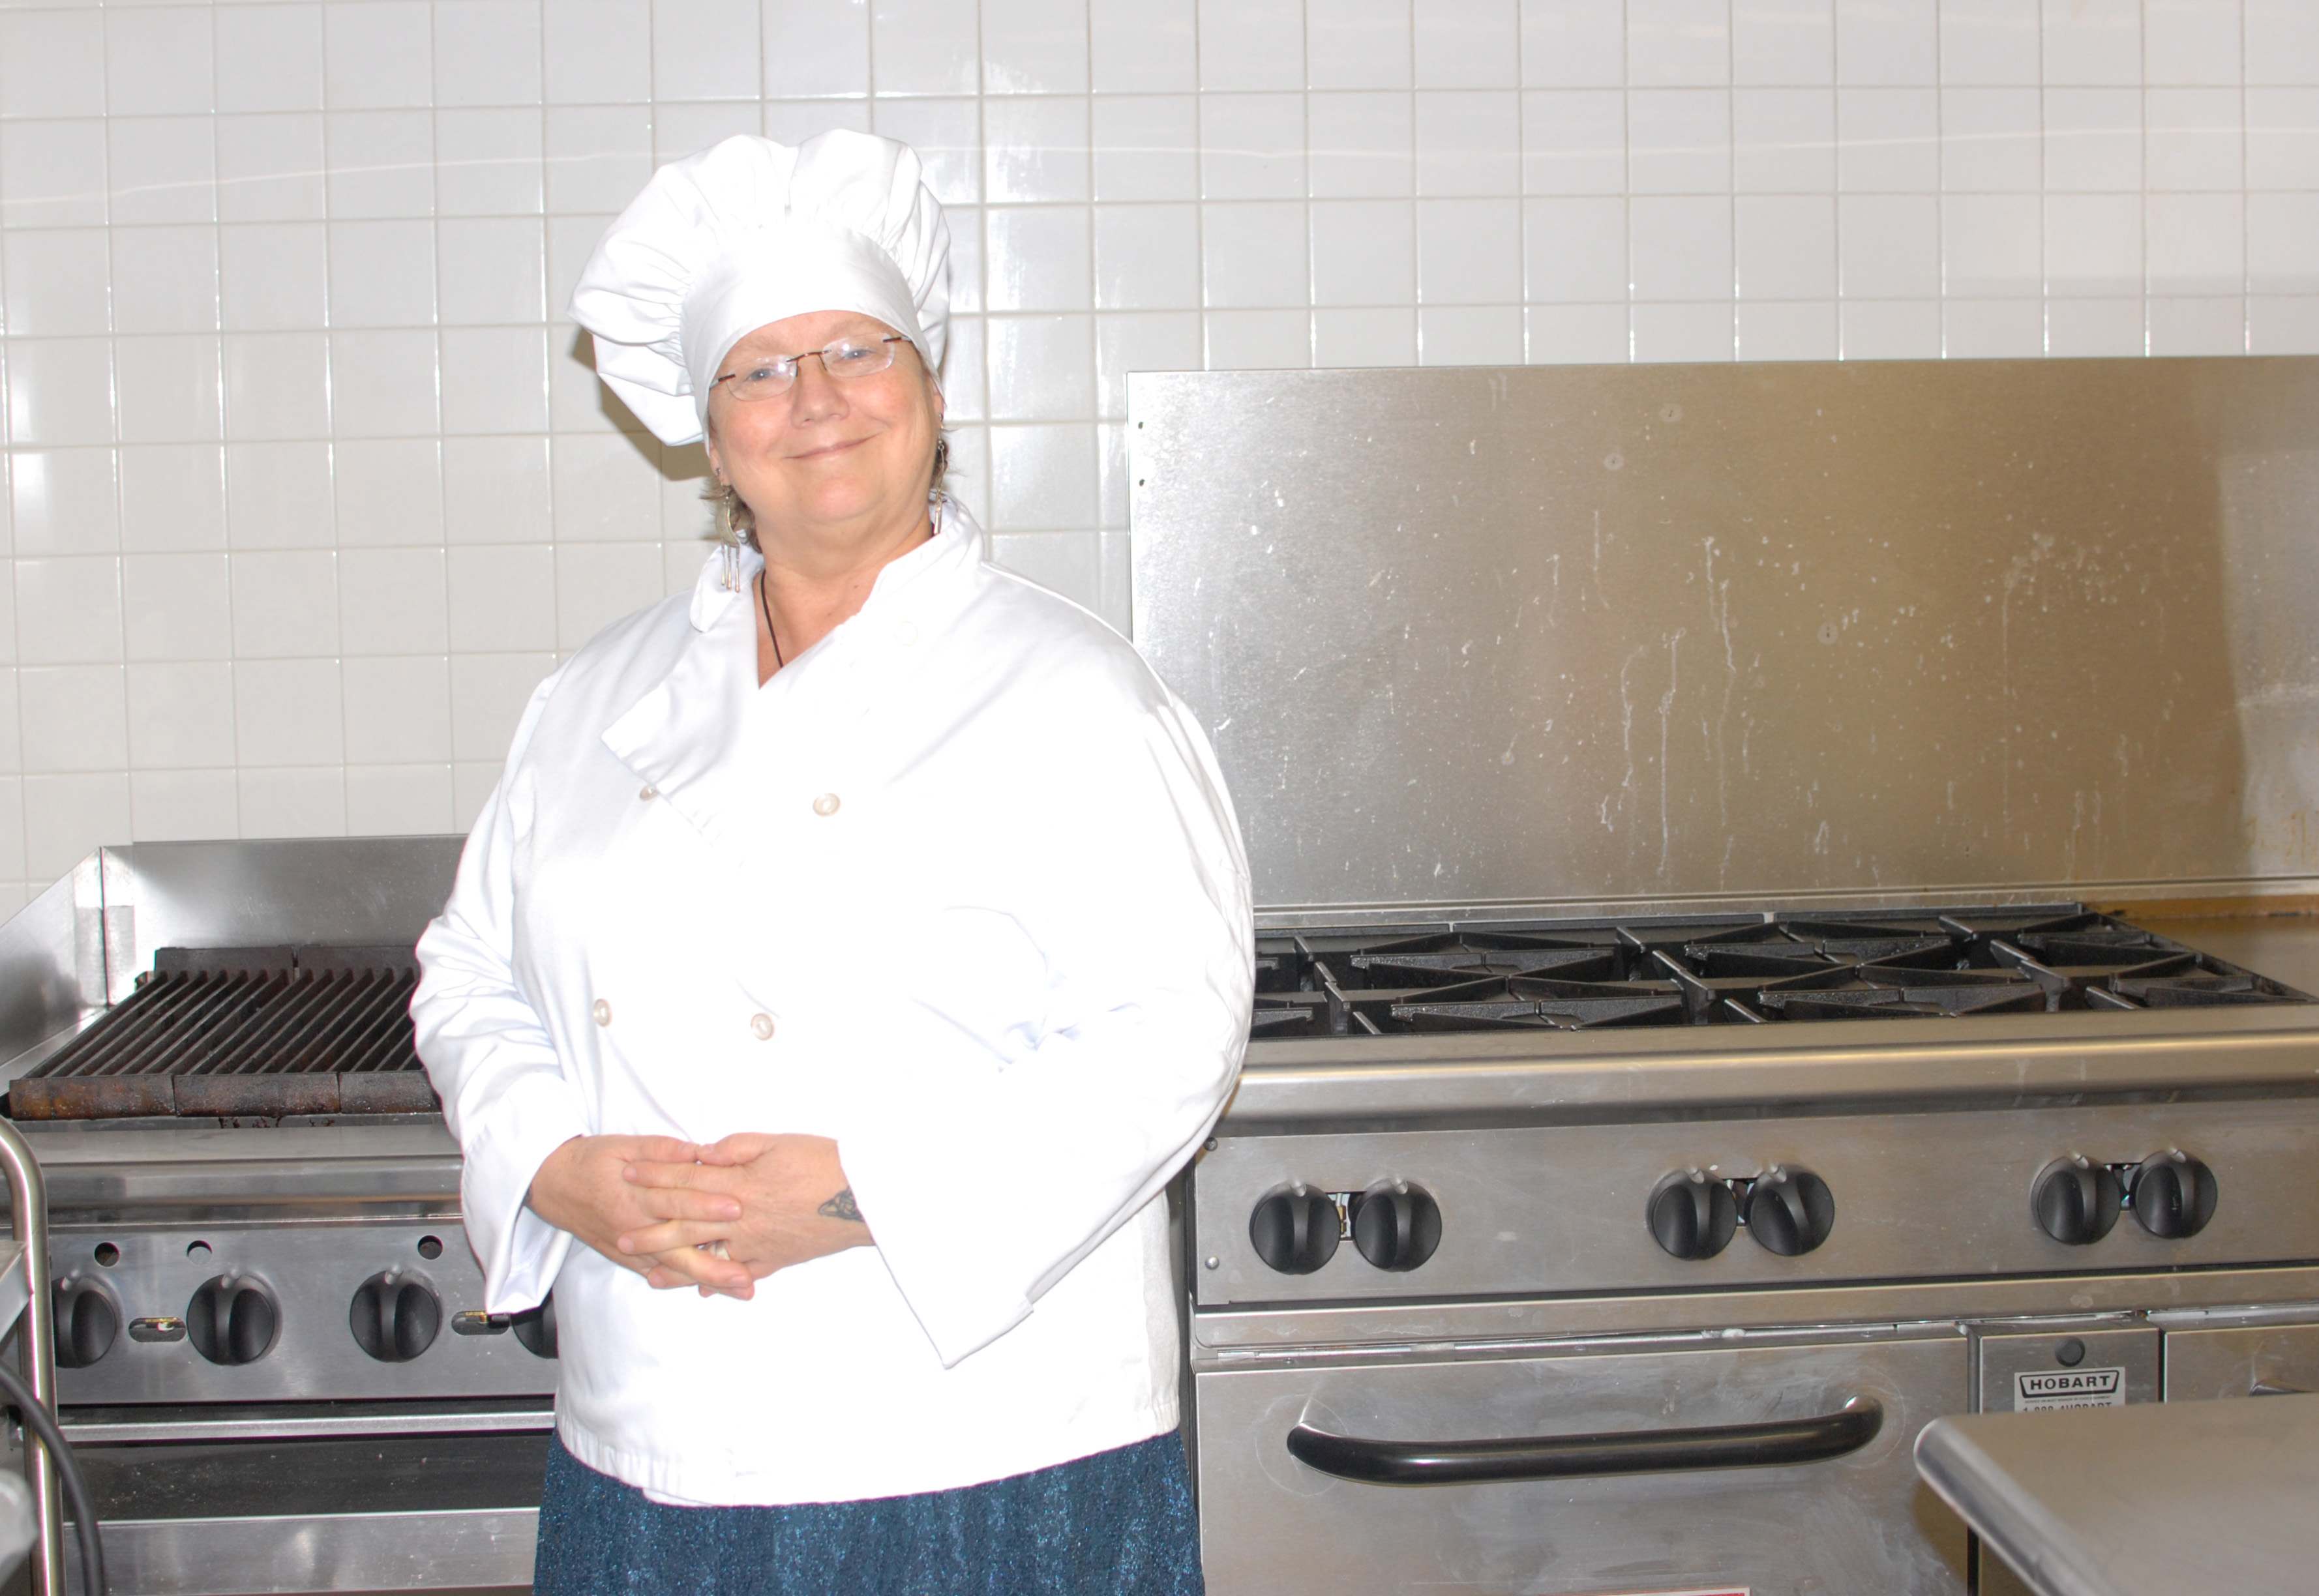 HHSS culinary arts teacher enters baking competition to donate prizes to campus